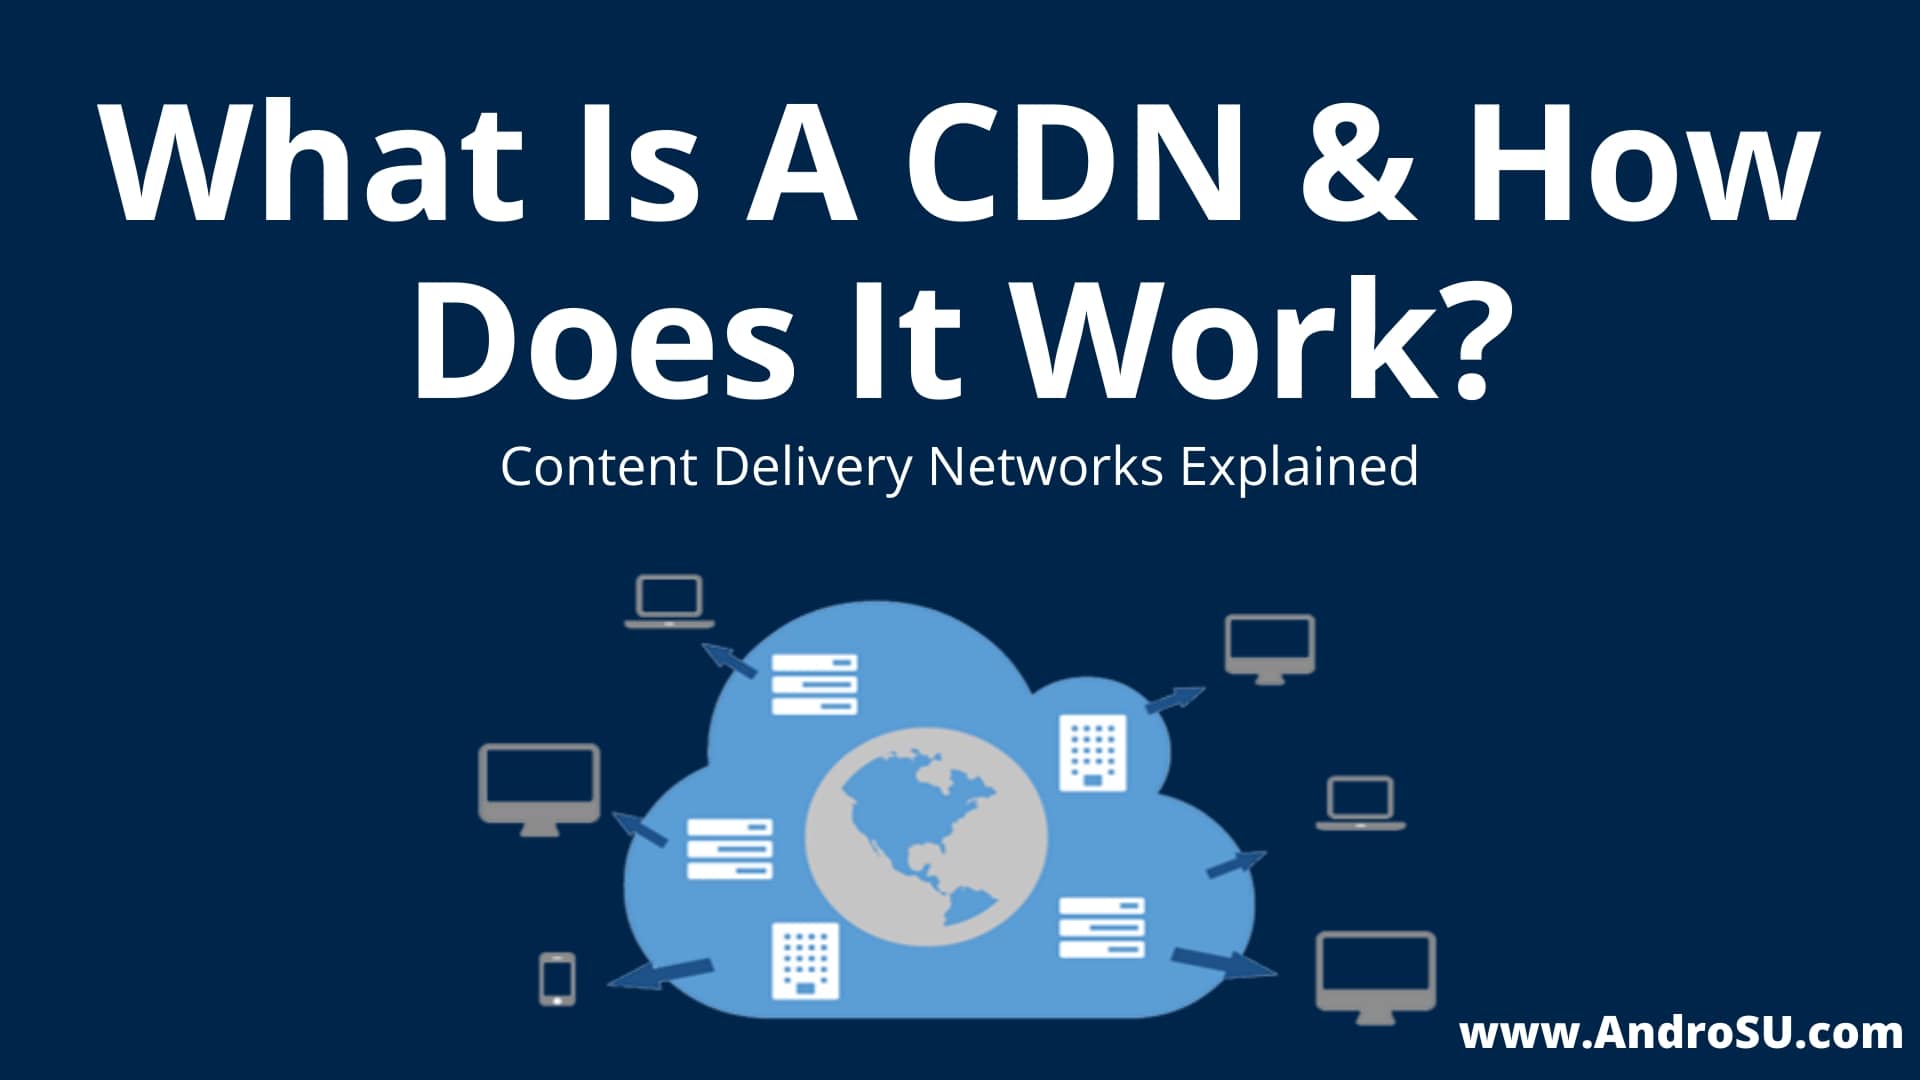 What is CDN & How does it Work? Content Delivery Networks